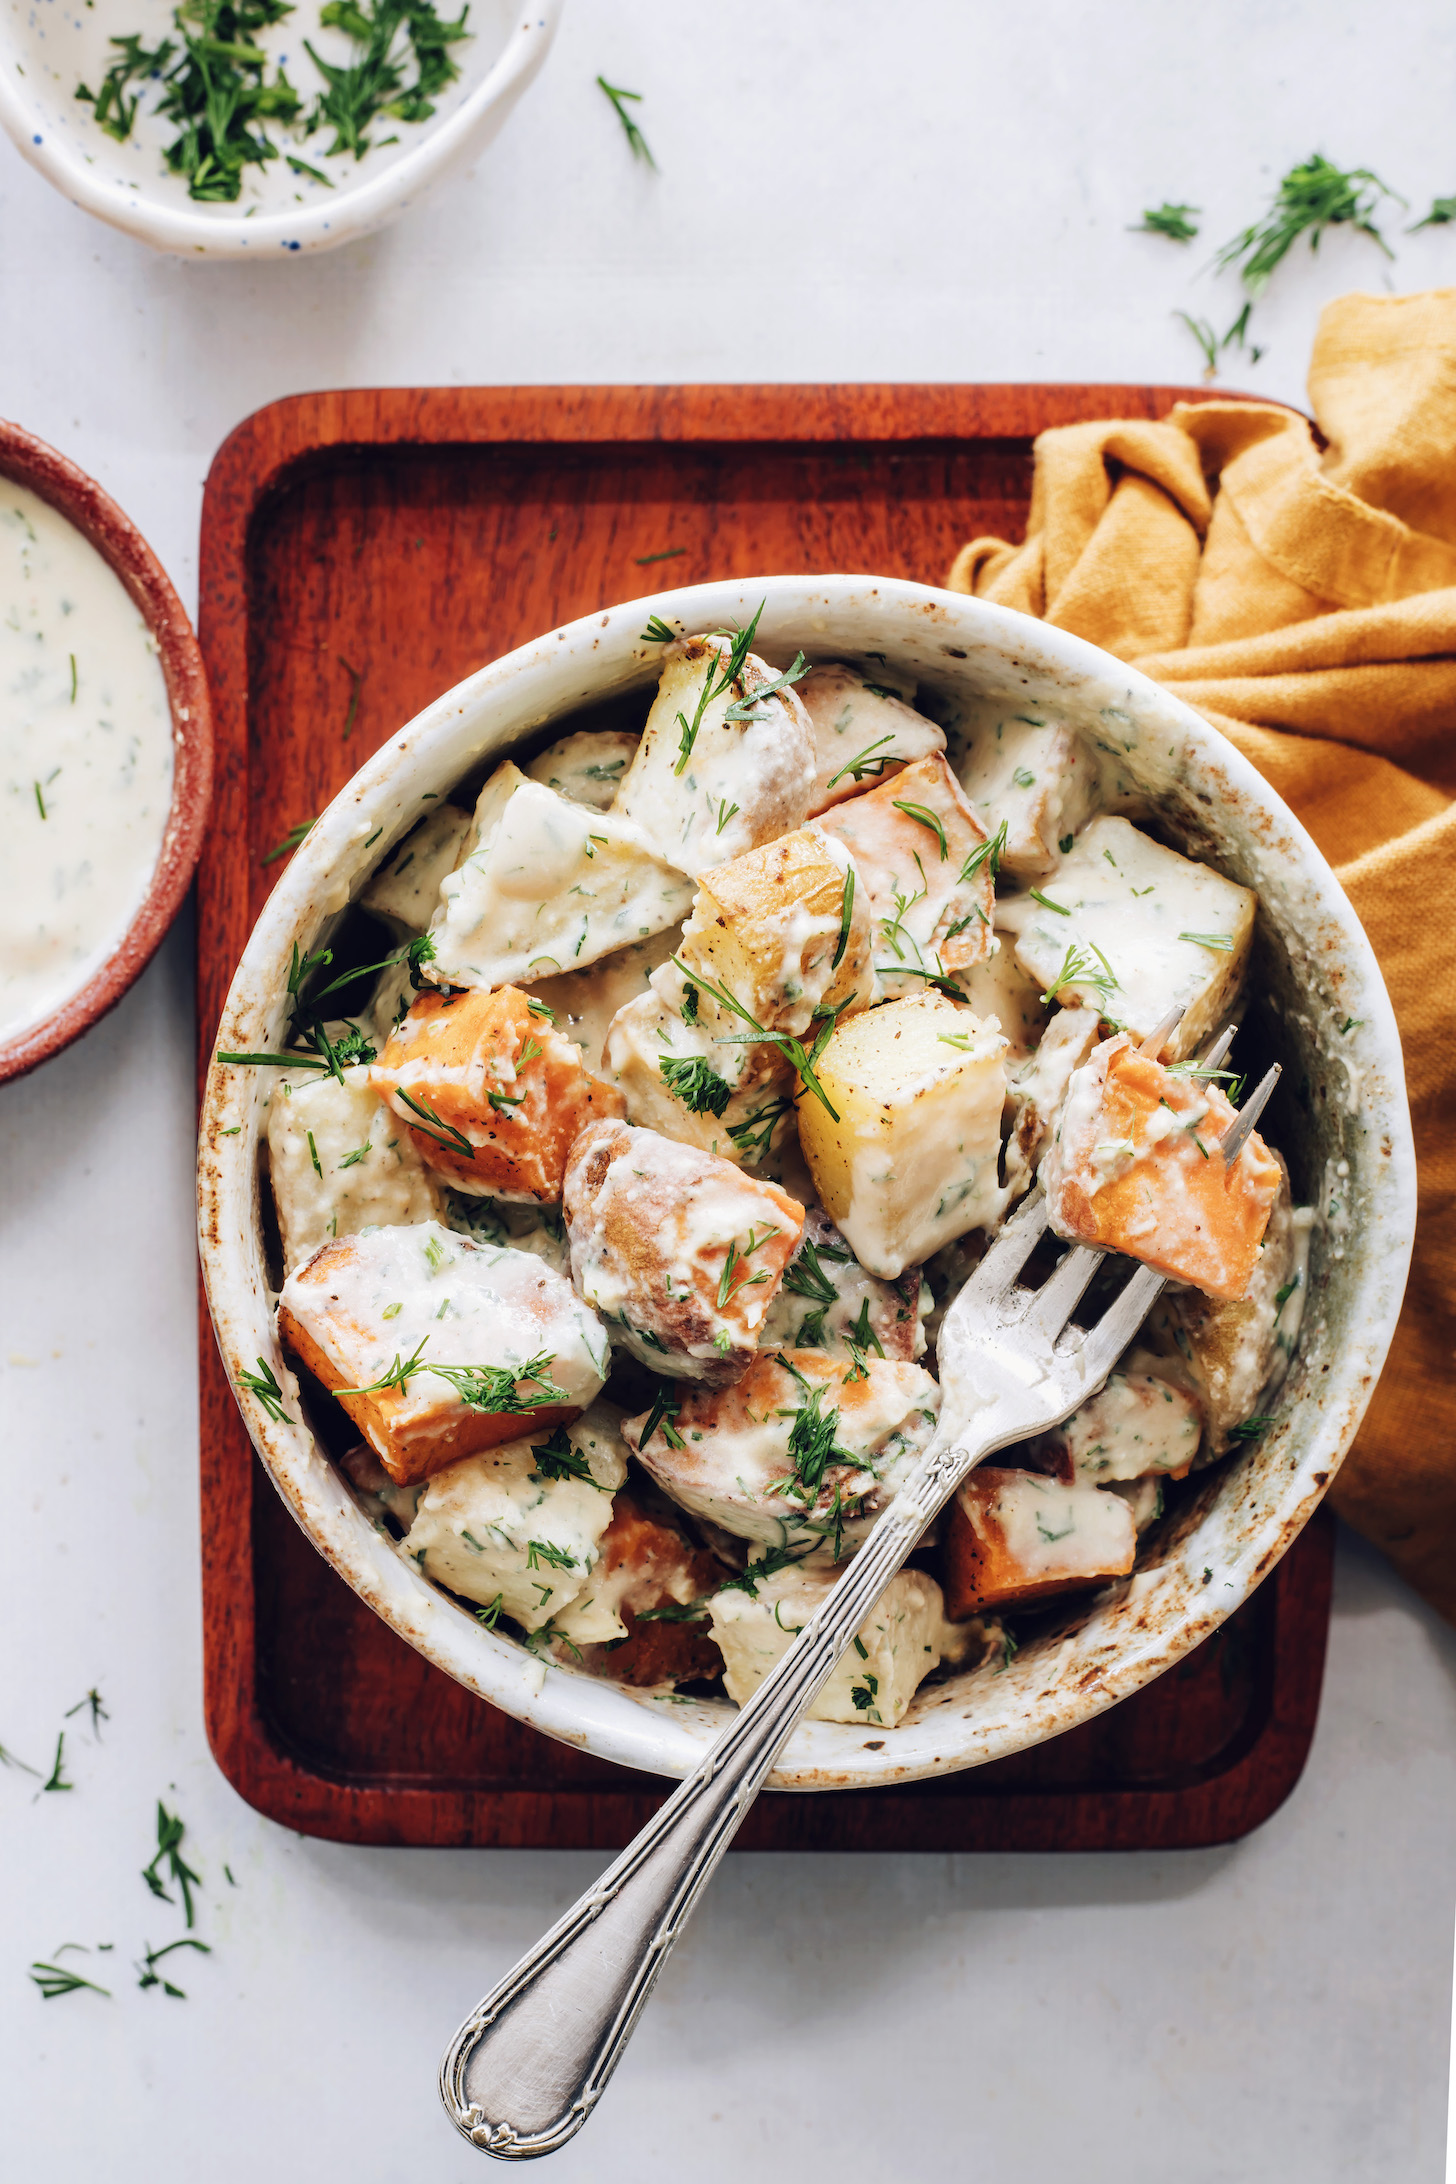 Fork in a bowl of roasted potato salad with garlic dill dressing